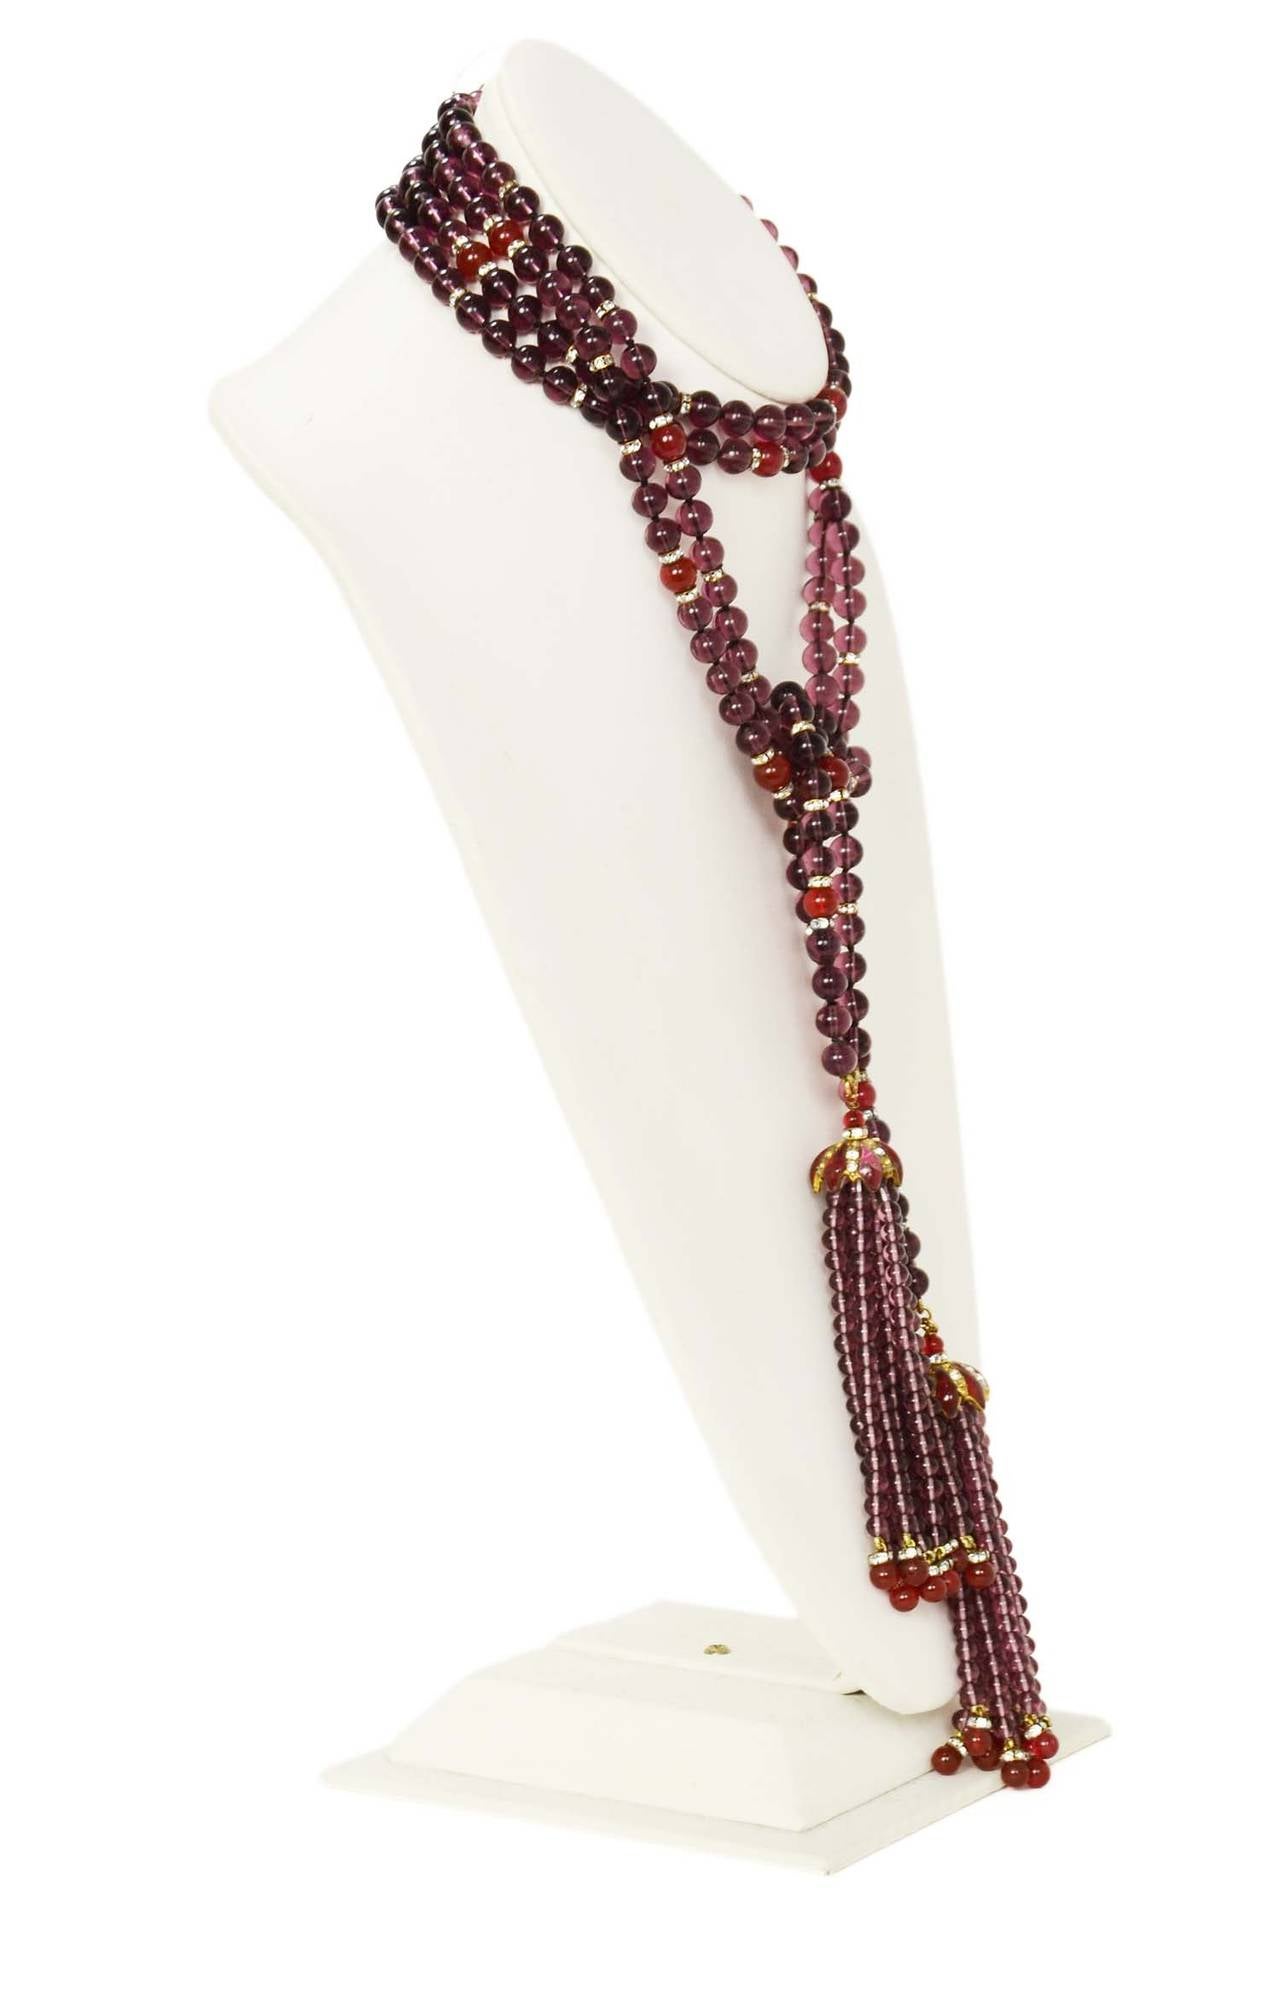 Chanel Vintage '83 Double  Gripoix Lariat Necklace w/ TasselsFeatures purple and red gripoix beads with strass crystal spacers. Tassels at each end of necklace. Can be worn tied long or wrap around neck and then tied.

    Made in: France
   